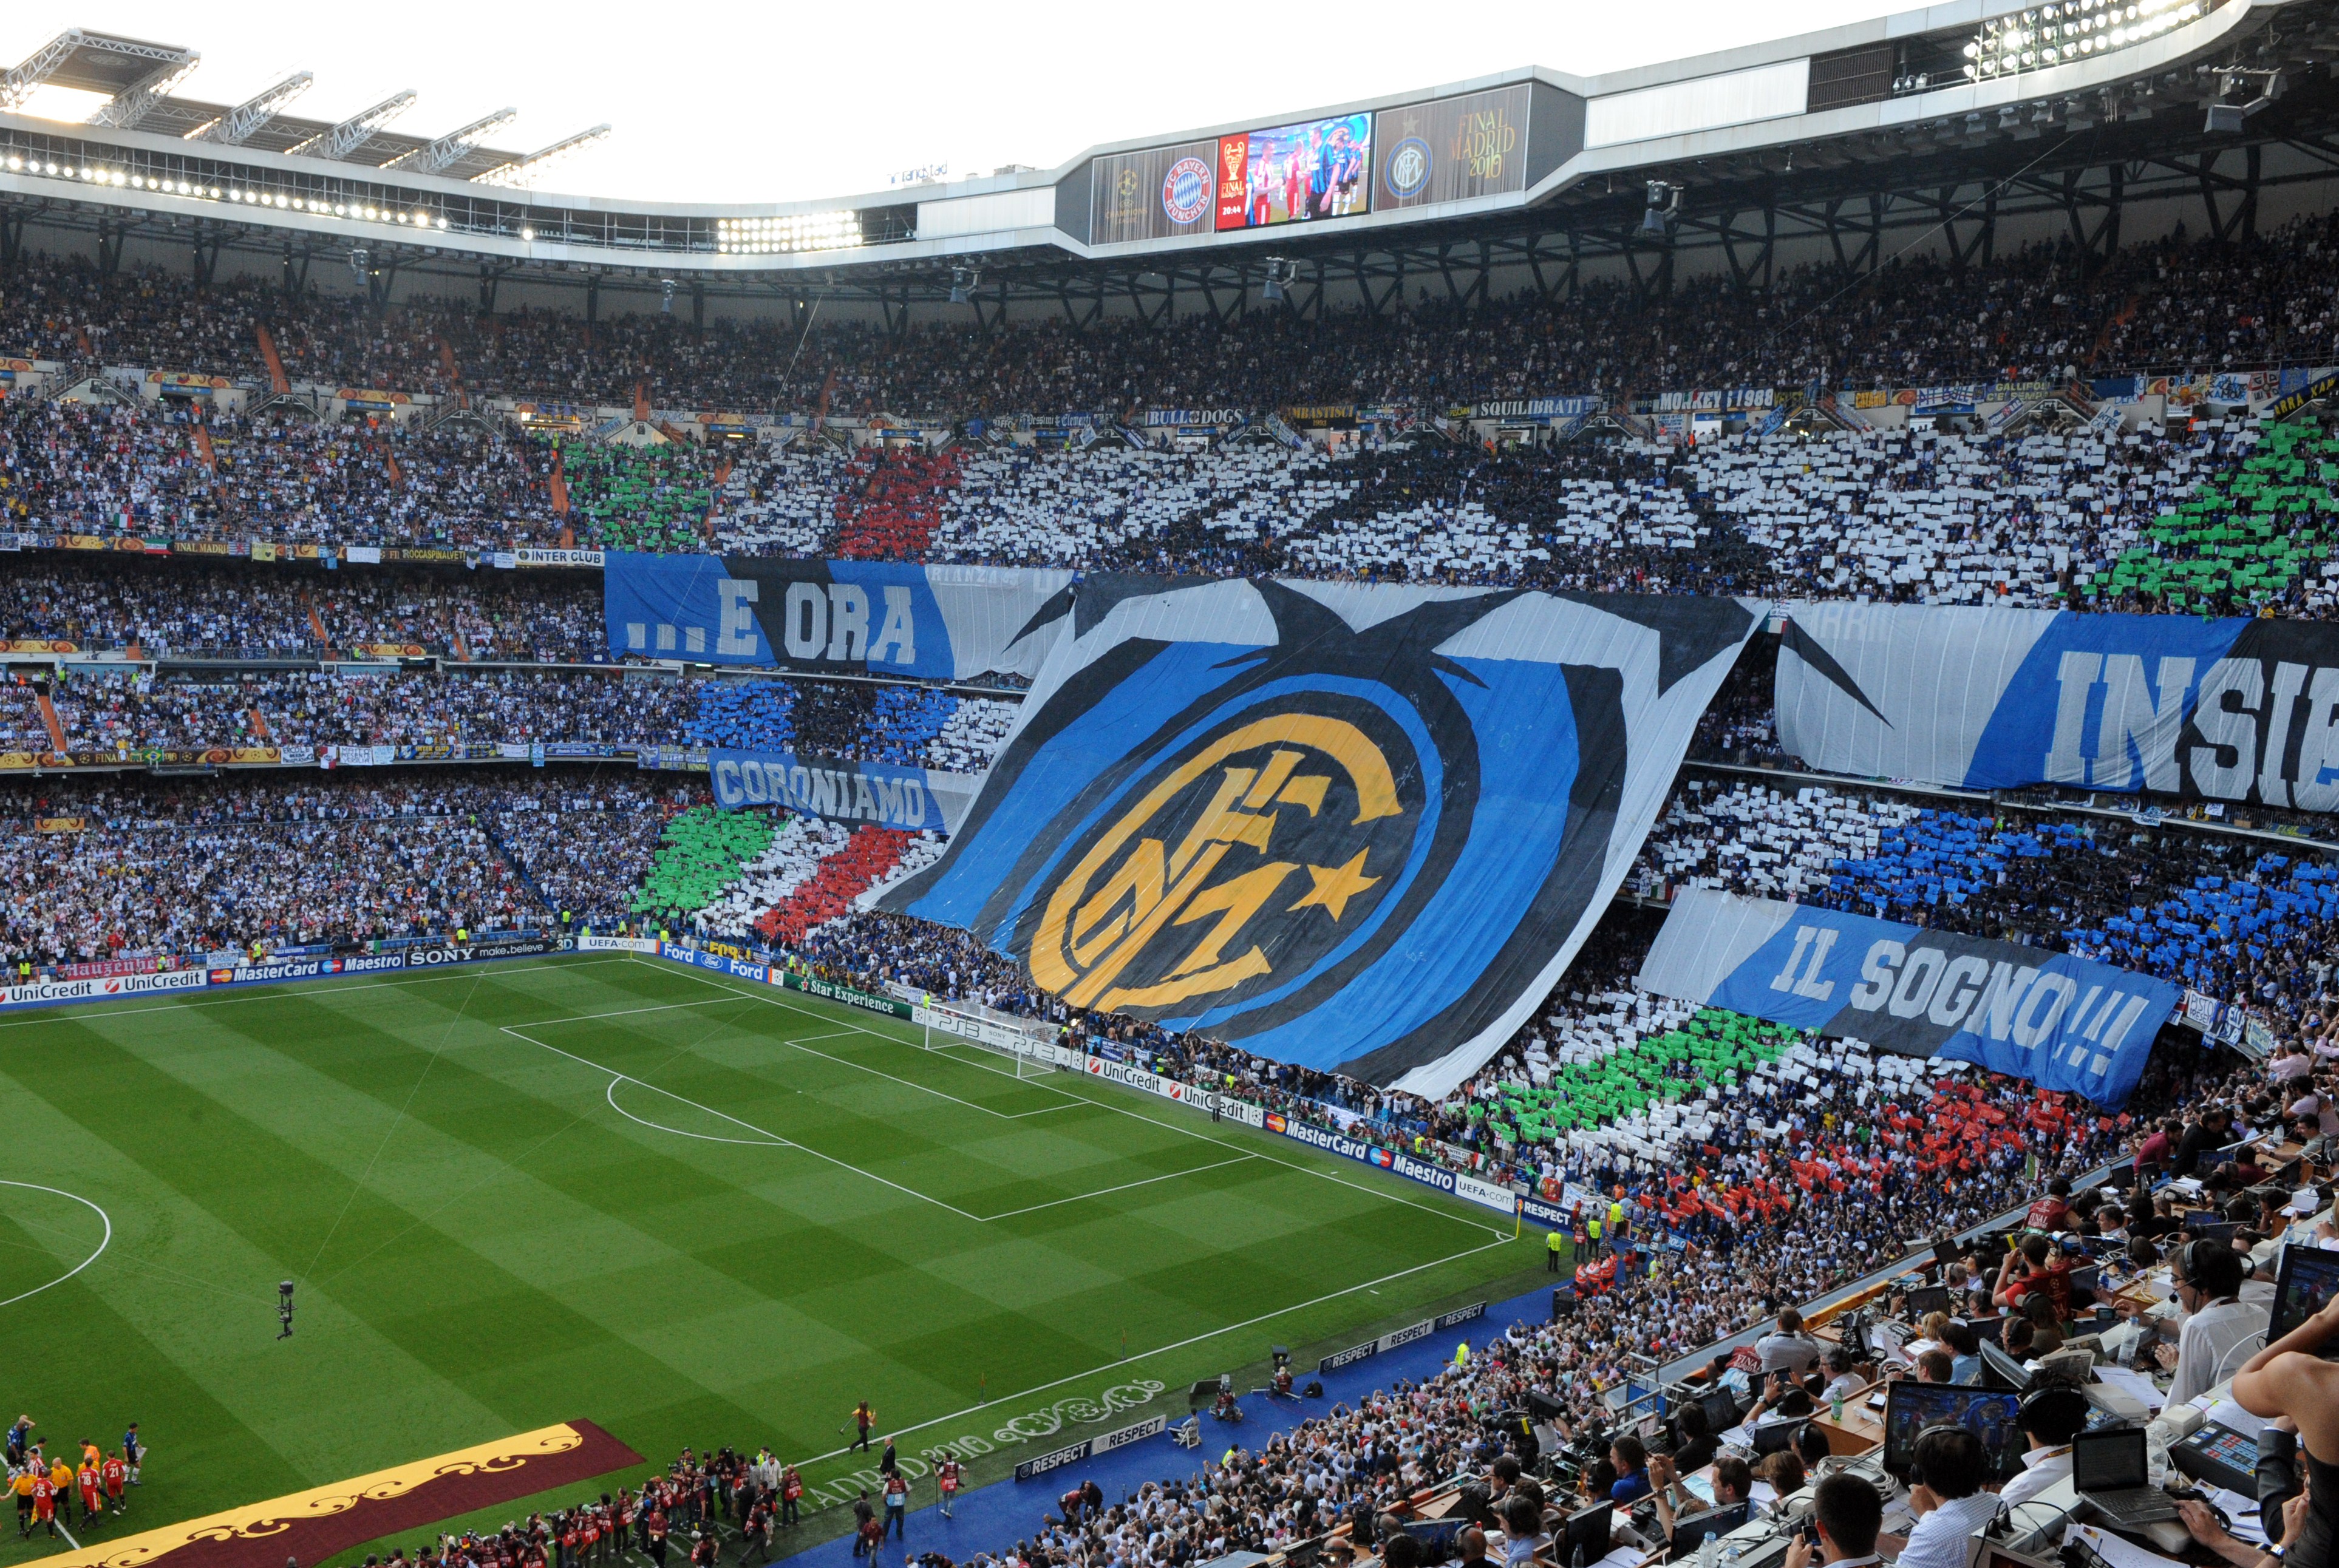 The logo of Inter Milan is displayed before the UEFA Champions League final soccer match between Inter Milan and Bayern Munich at the Santiago Bernabéu stadium in Madrid on May 22, 2010 (Mladen Antonov—AFP/Getty Images)